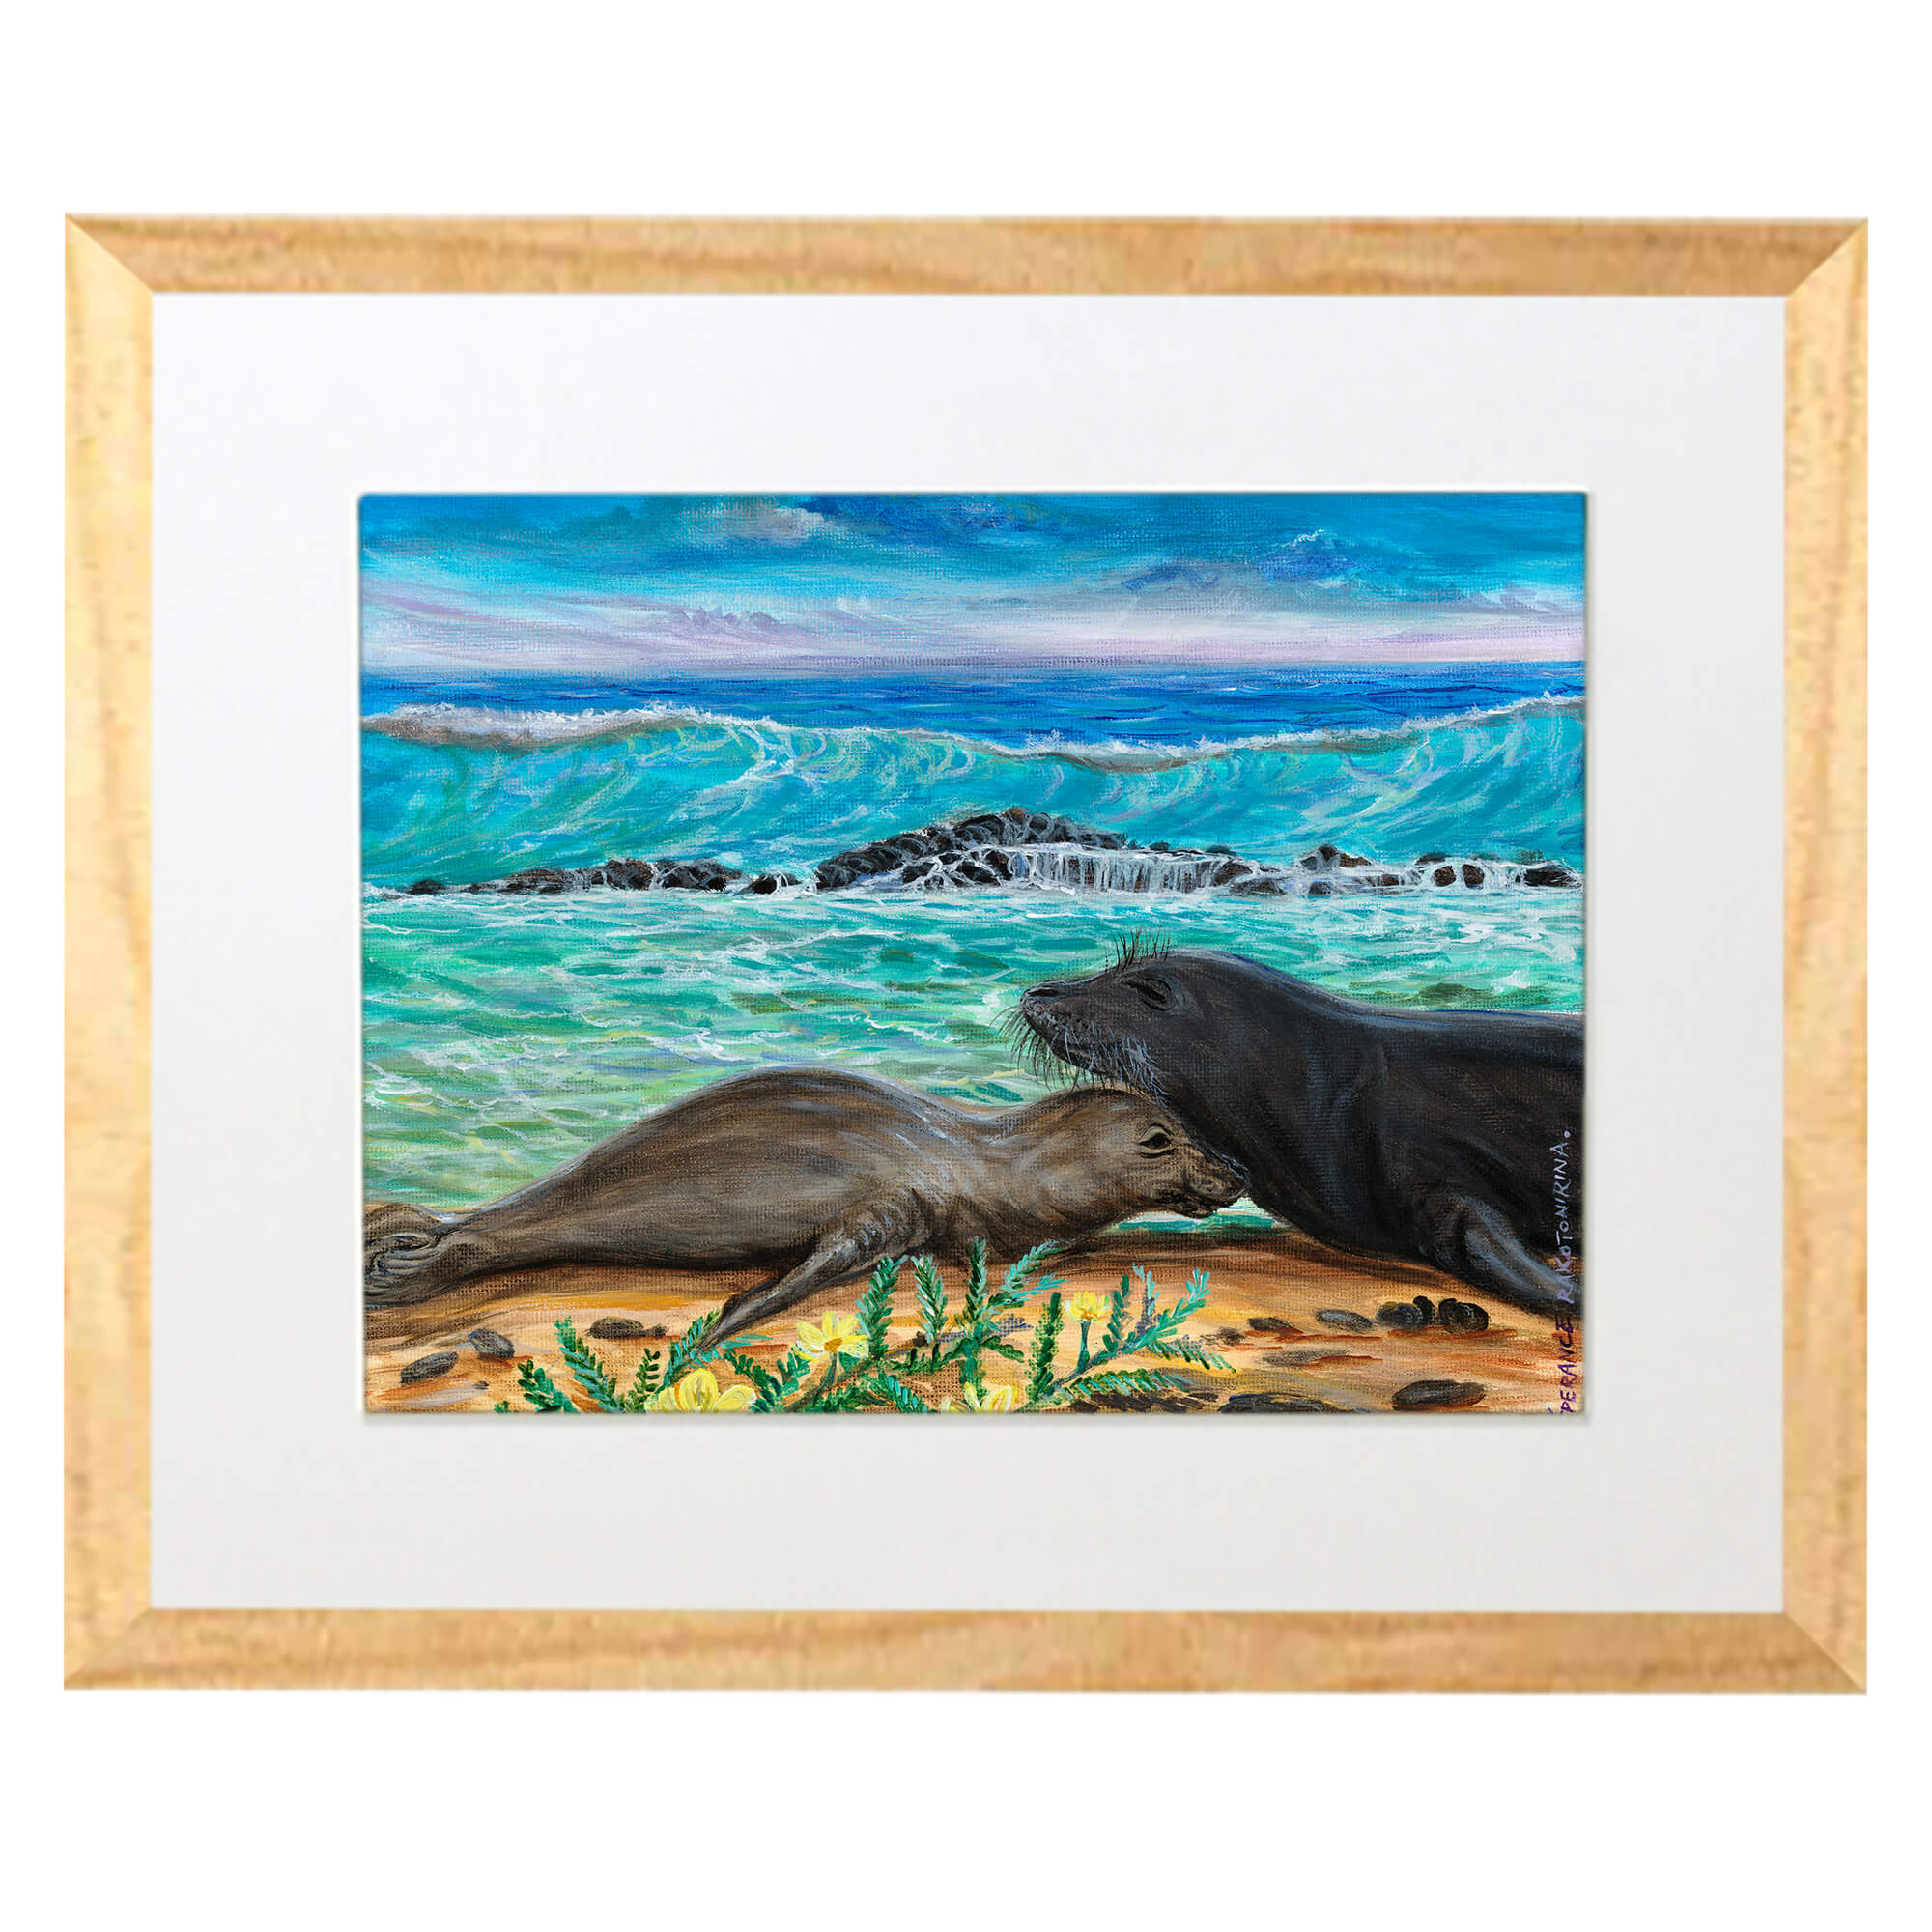 Matted art print with wood frame showcasing a small wave in the background by hawaii artist Esperance Rakotonirina